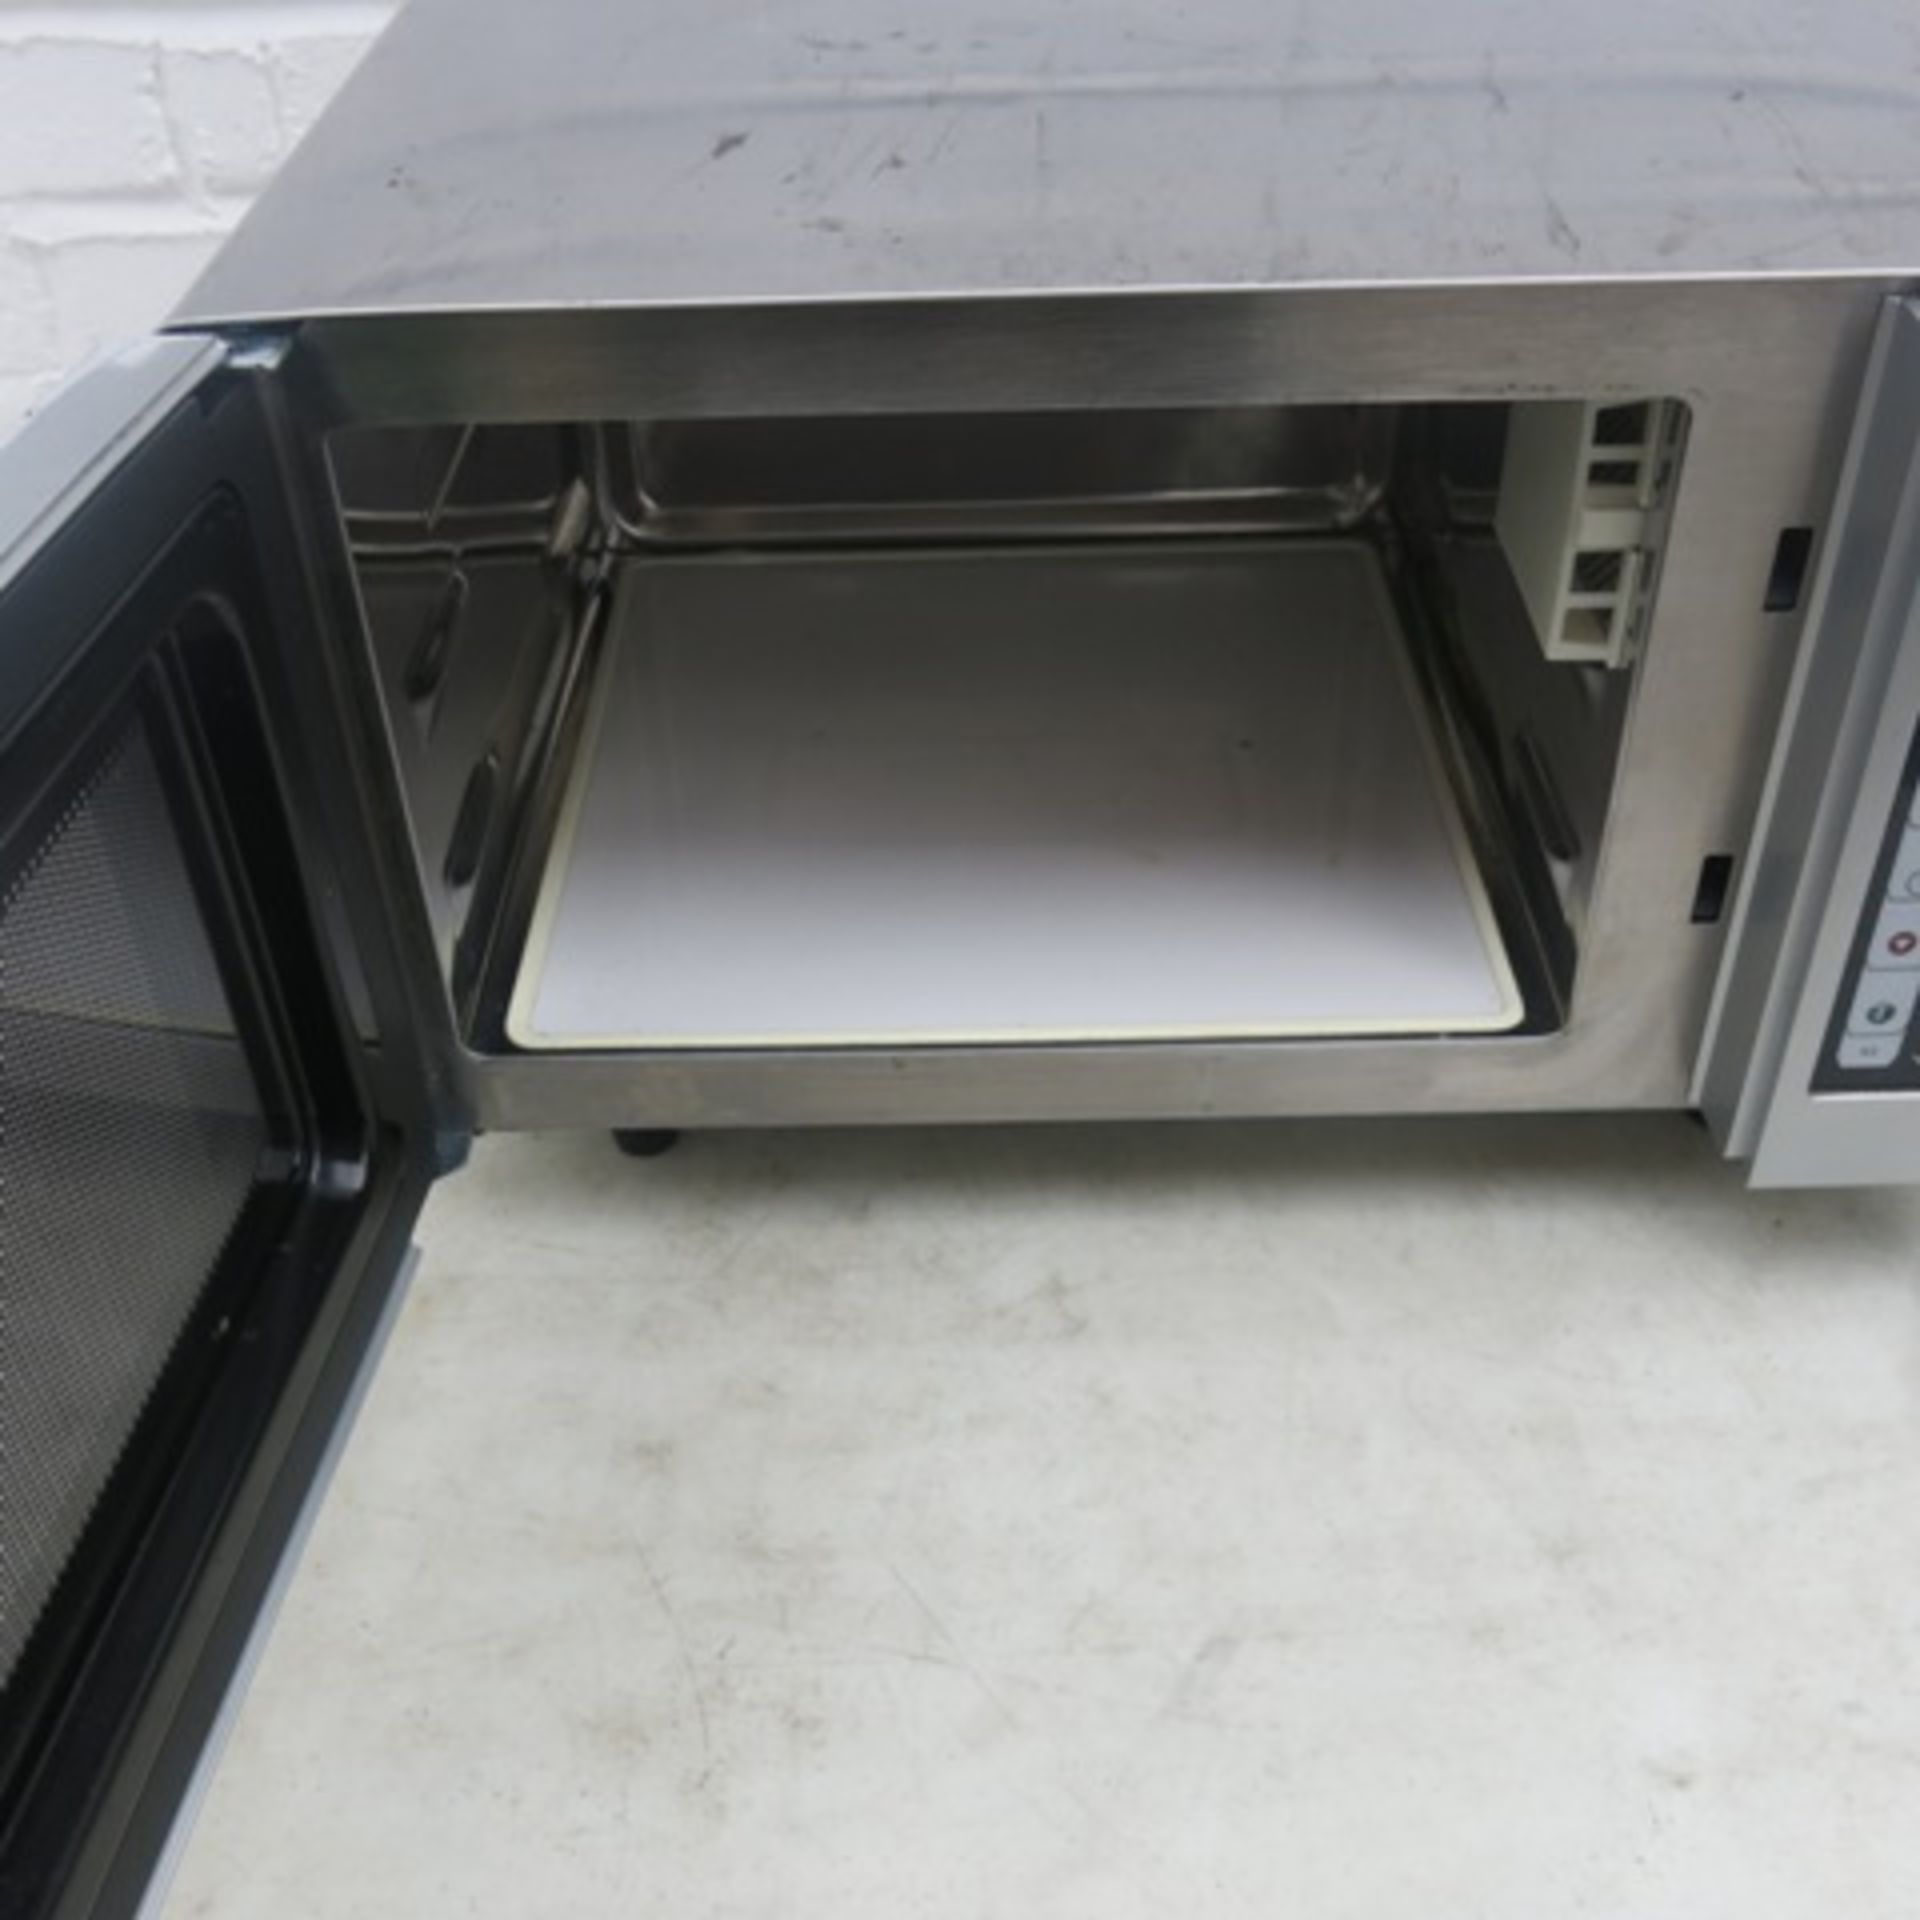 Menumaster Commercial 1550w Microwave, Model RM5510TS - Image 4 of 5